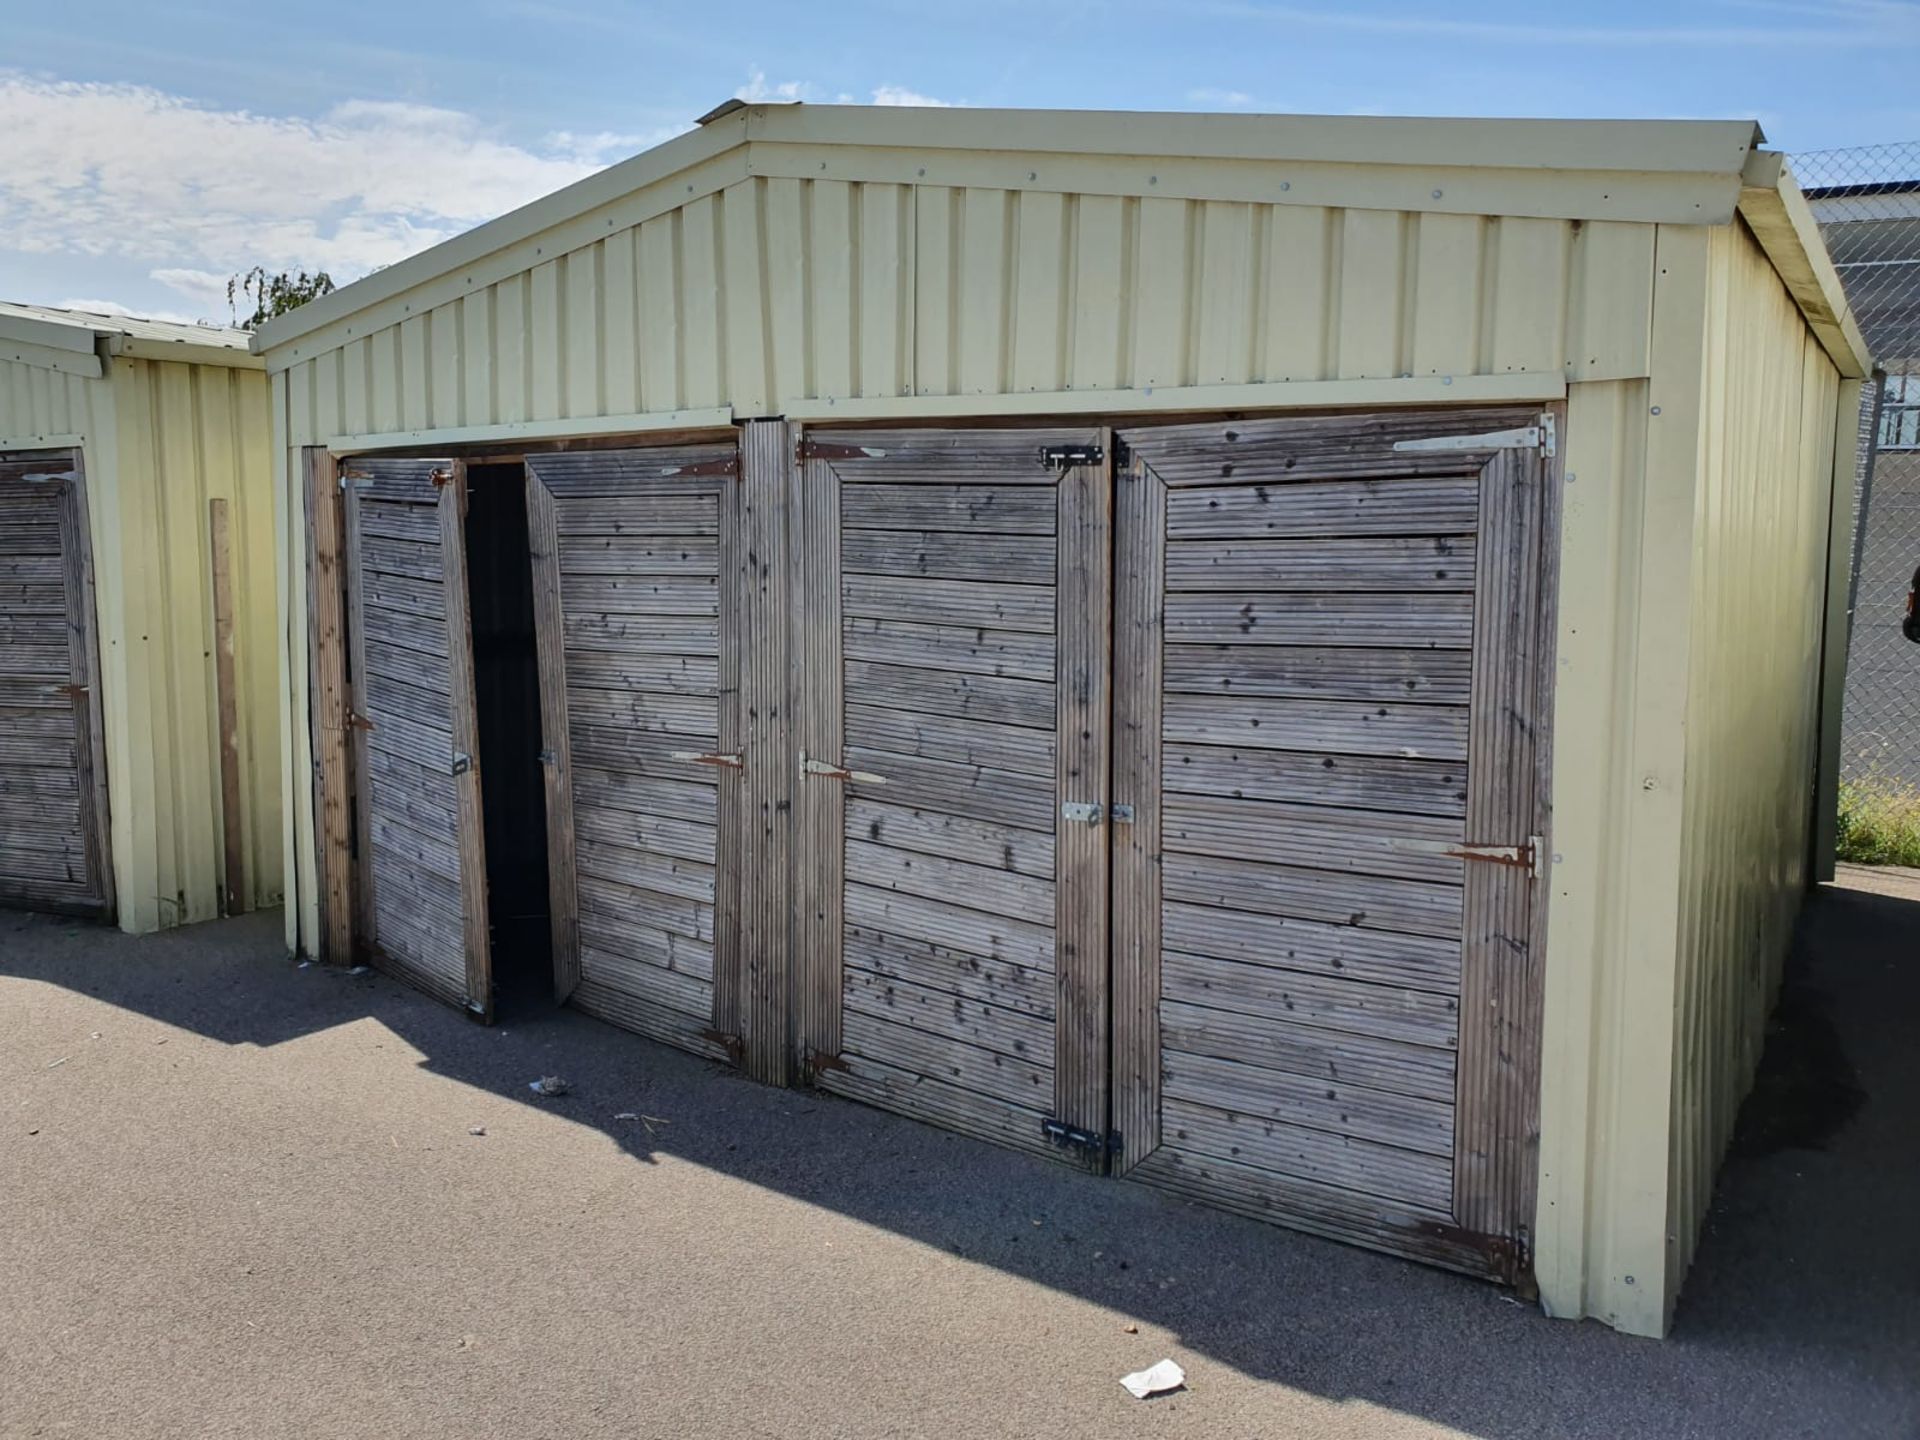 1 x Large Steel Storage Shed Container With Four Wooden Folding Doors - Approx Dimensions 5M x 5M